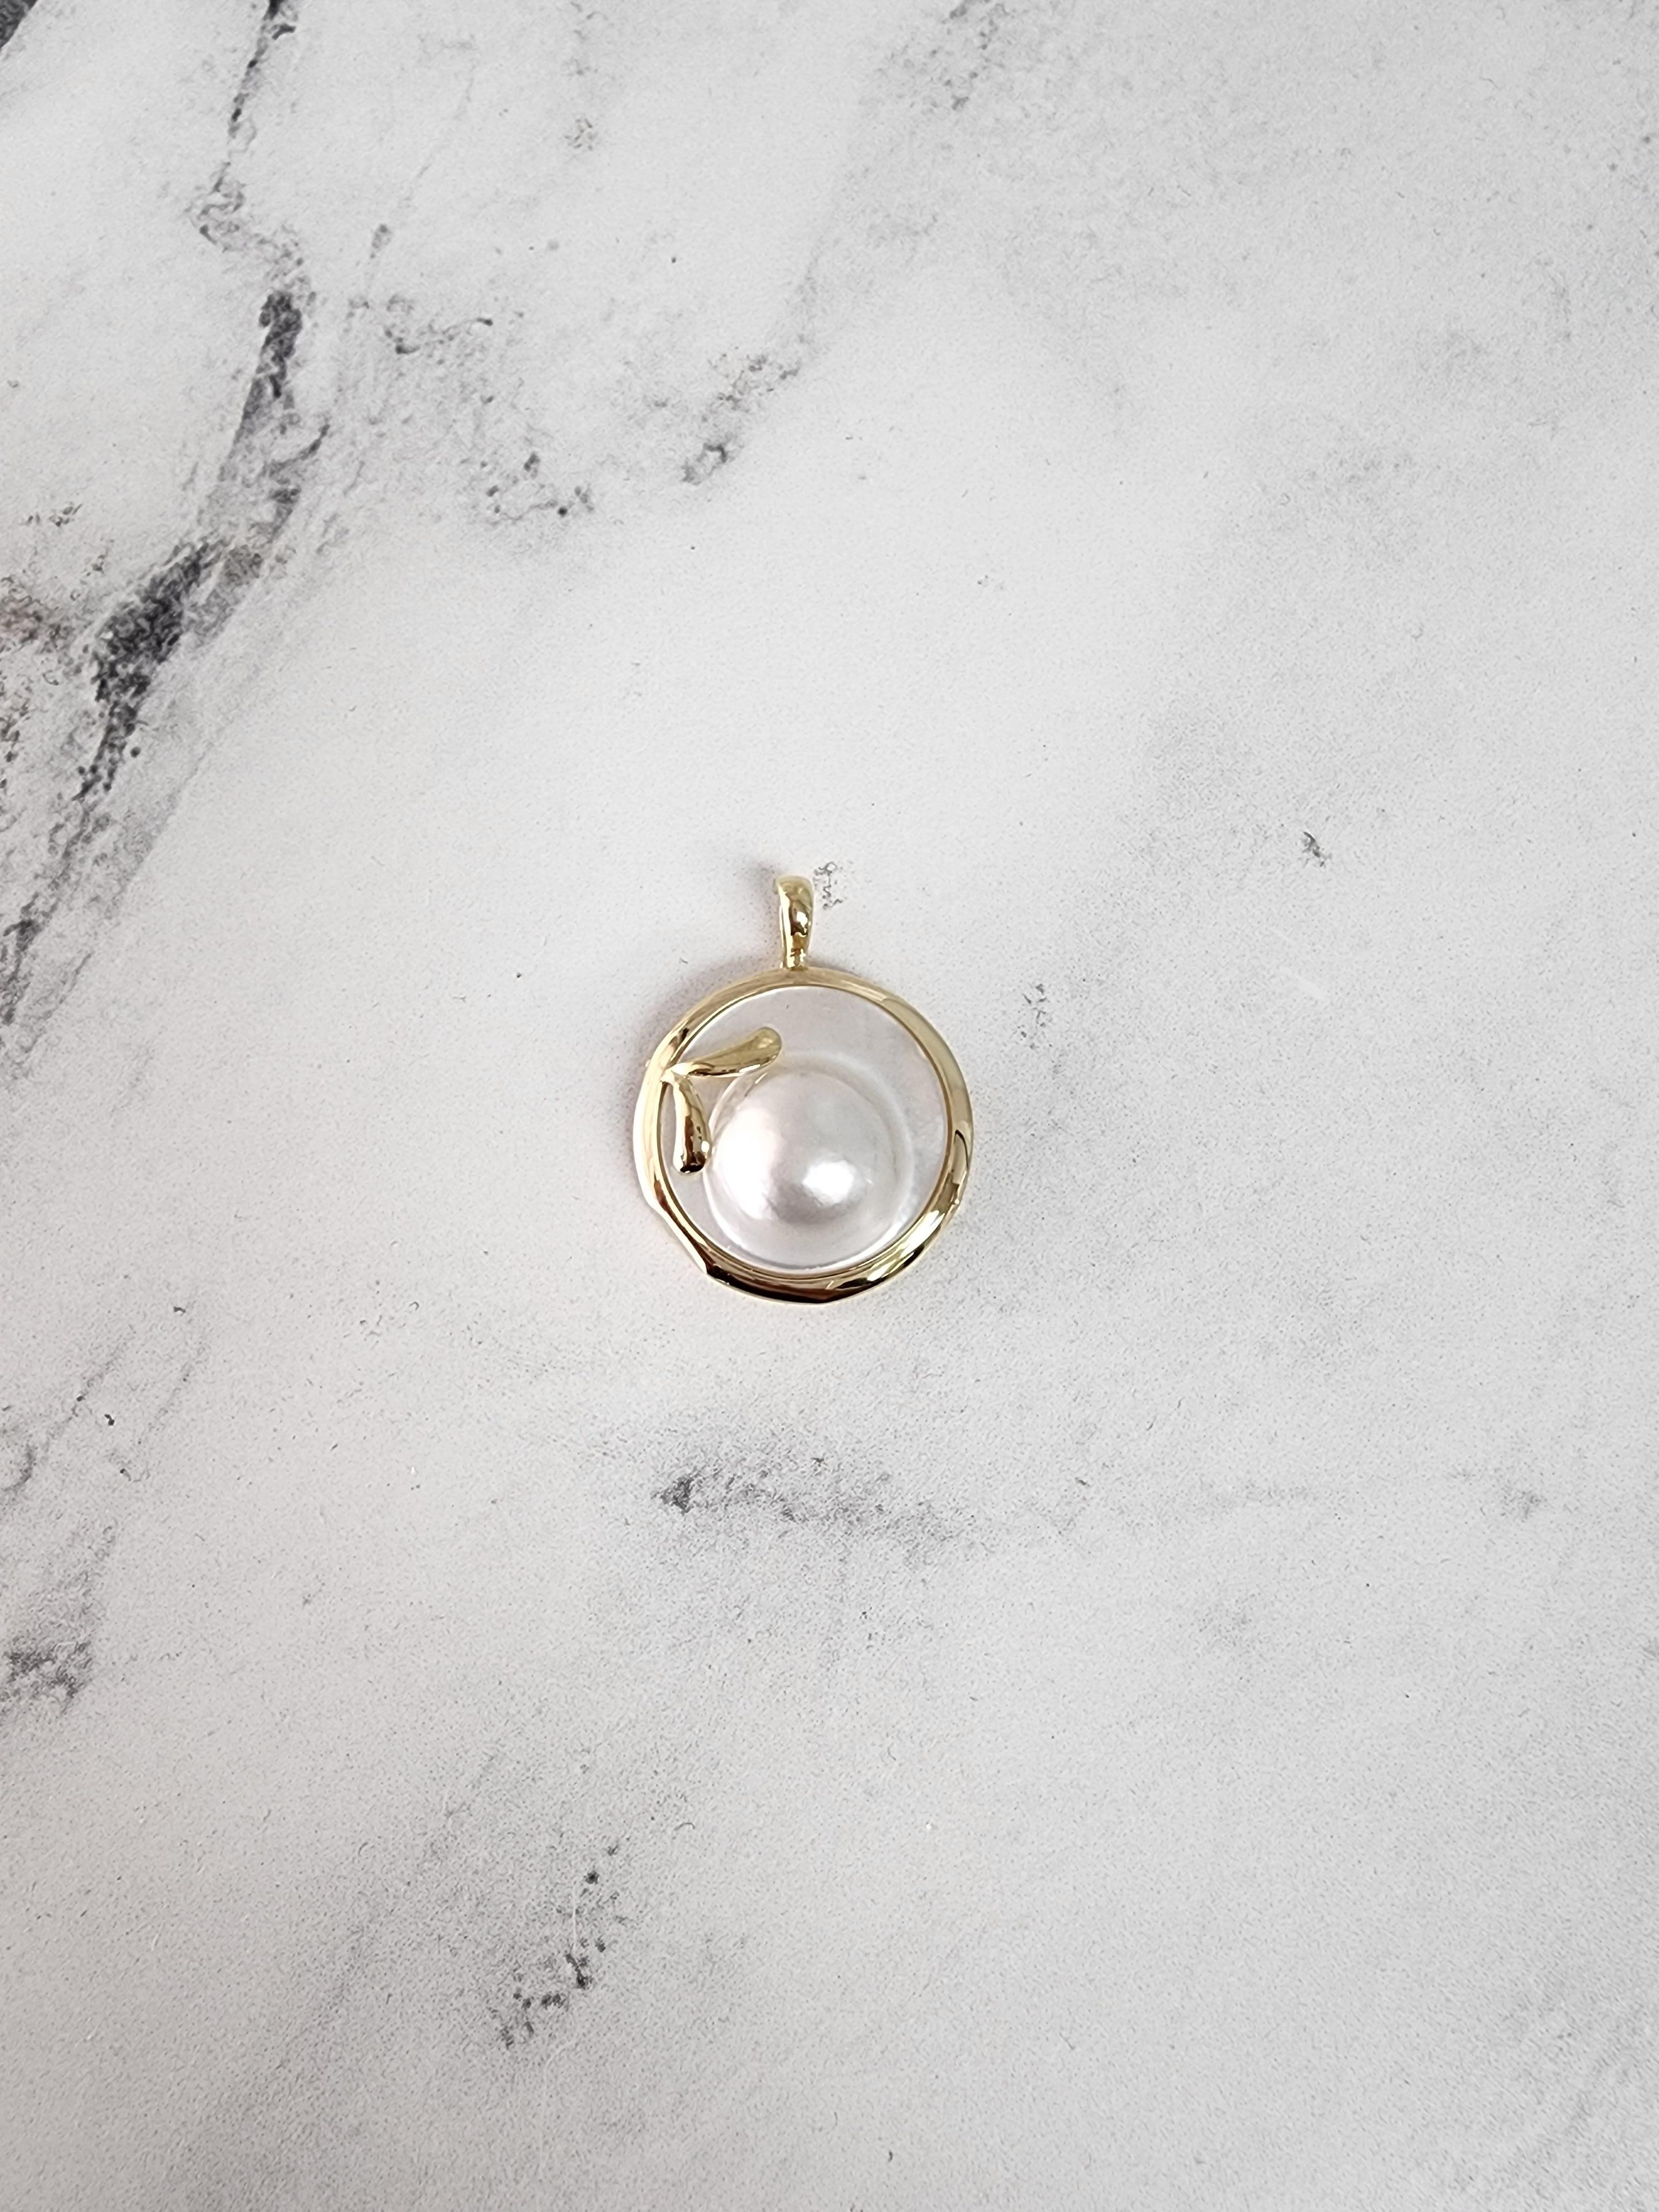 Blister Pearl Disc Necklace with Polished Bezel In New Condition For Sale In Sugar Land, TX